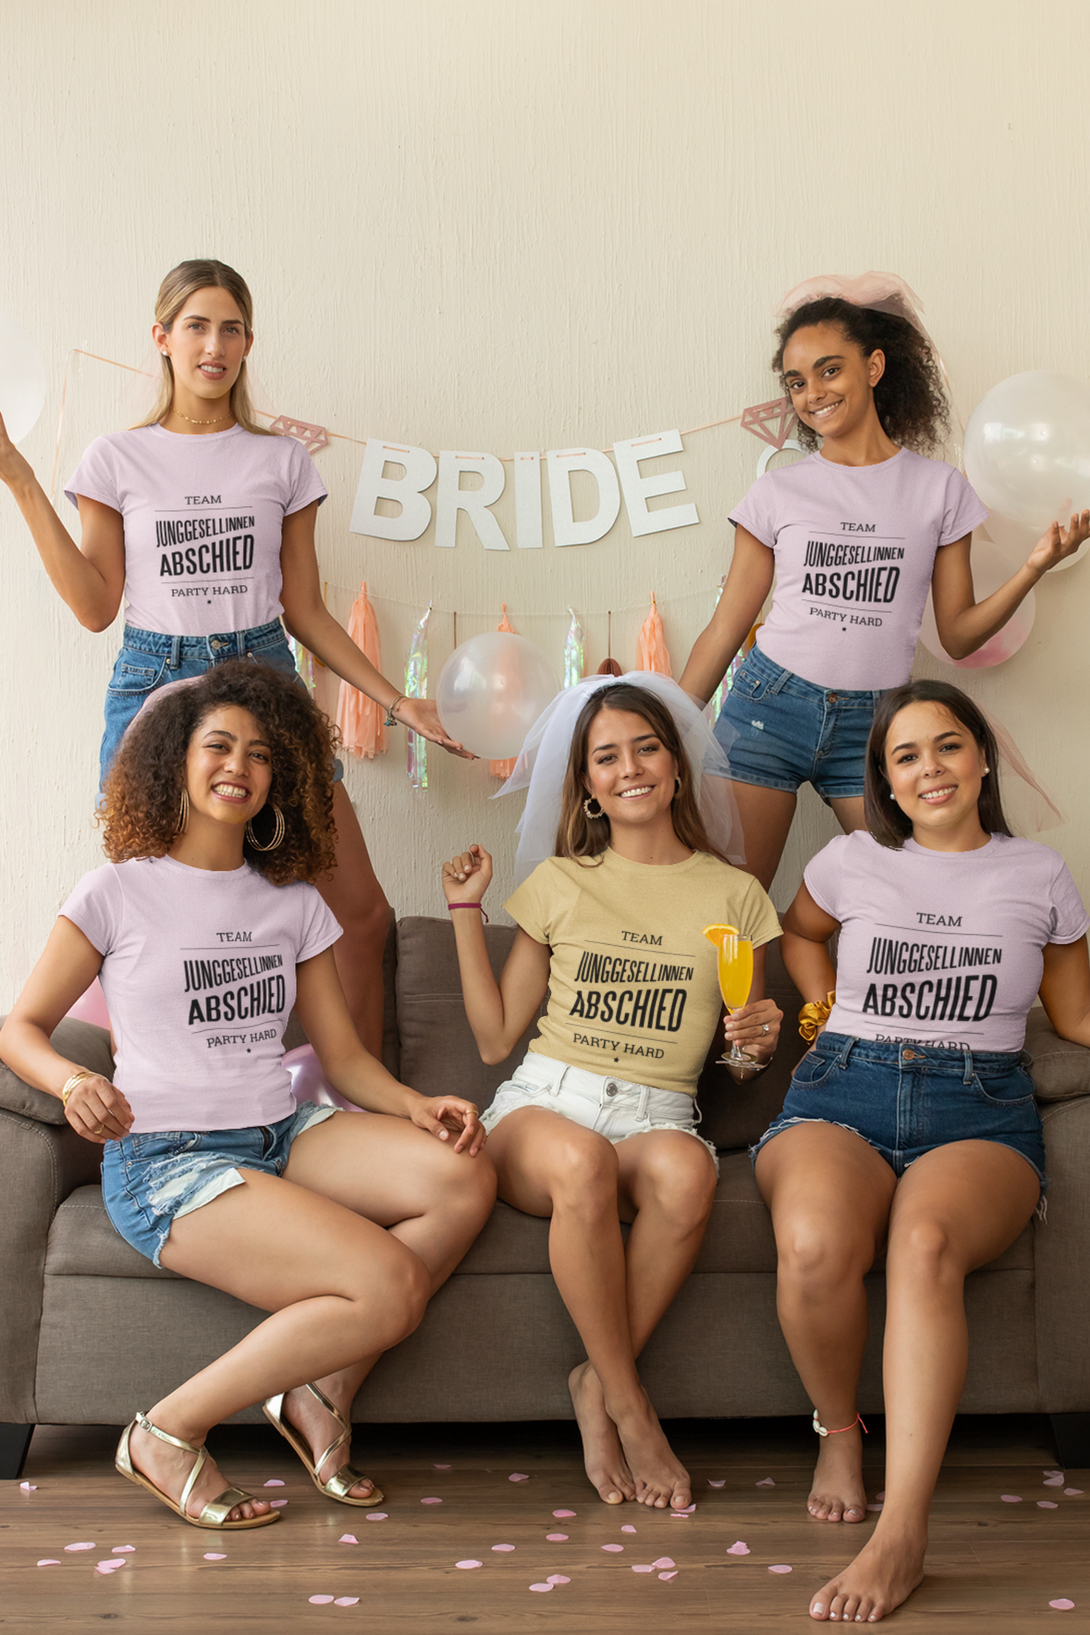 German Bachelor Party Printed T-Shirt For Women - WowWaves - 5